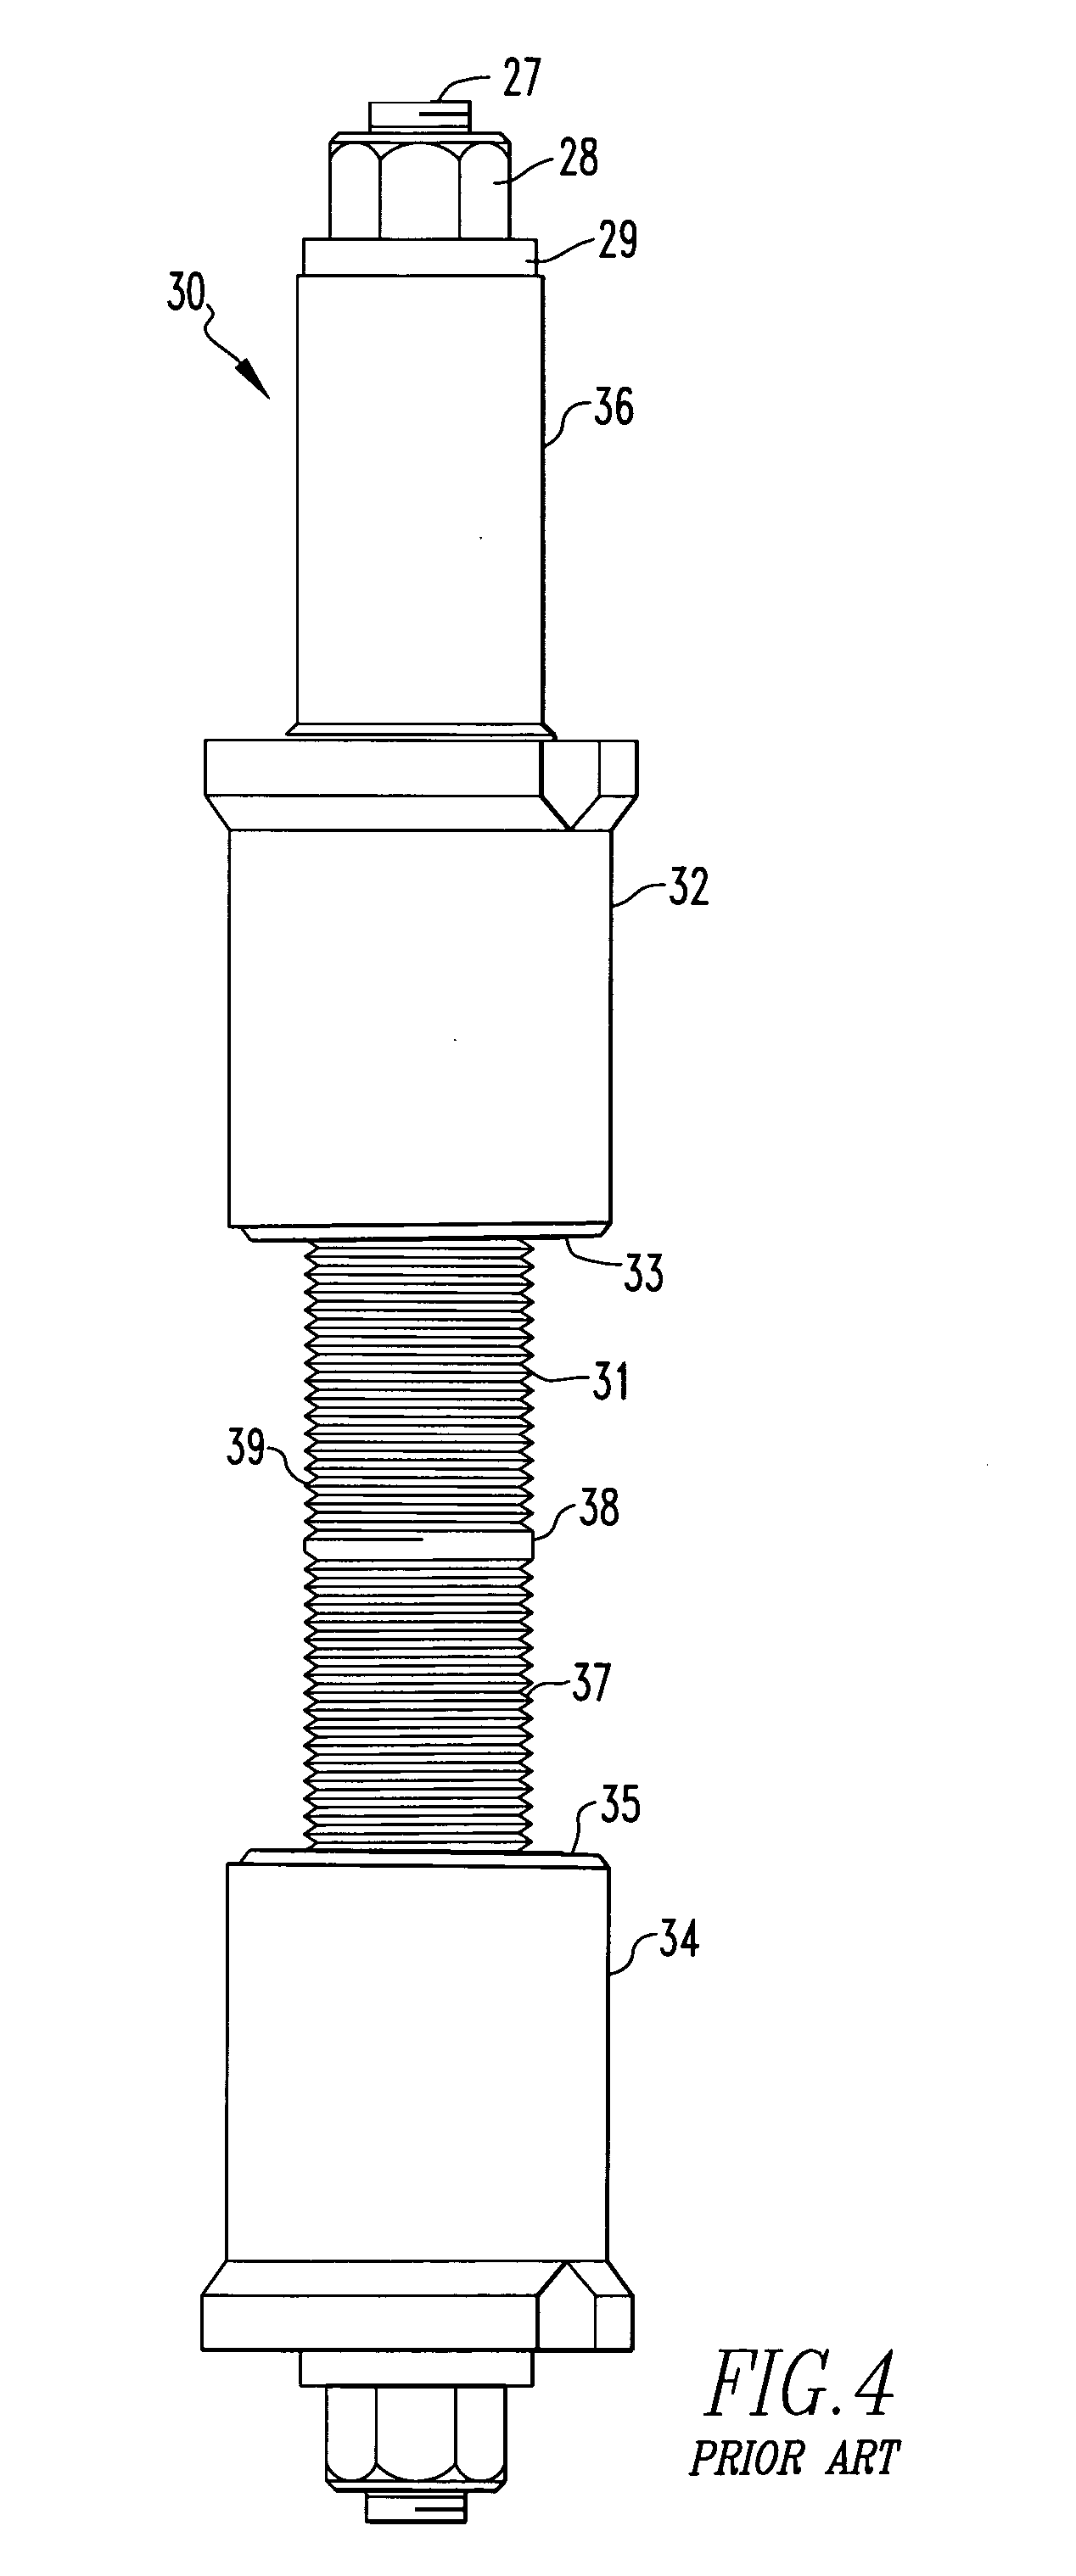 Multi-shouldered fixed bobbin tools for simultaneous friction stir welding of multiple parallel walls between parts